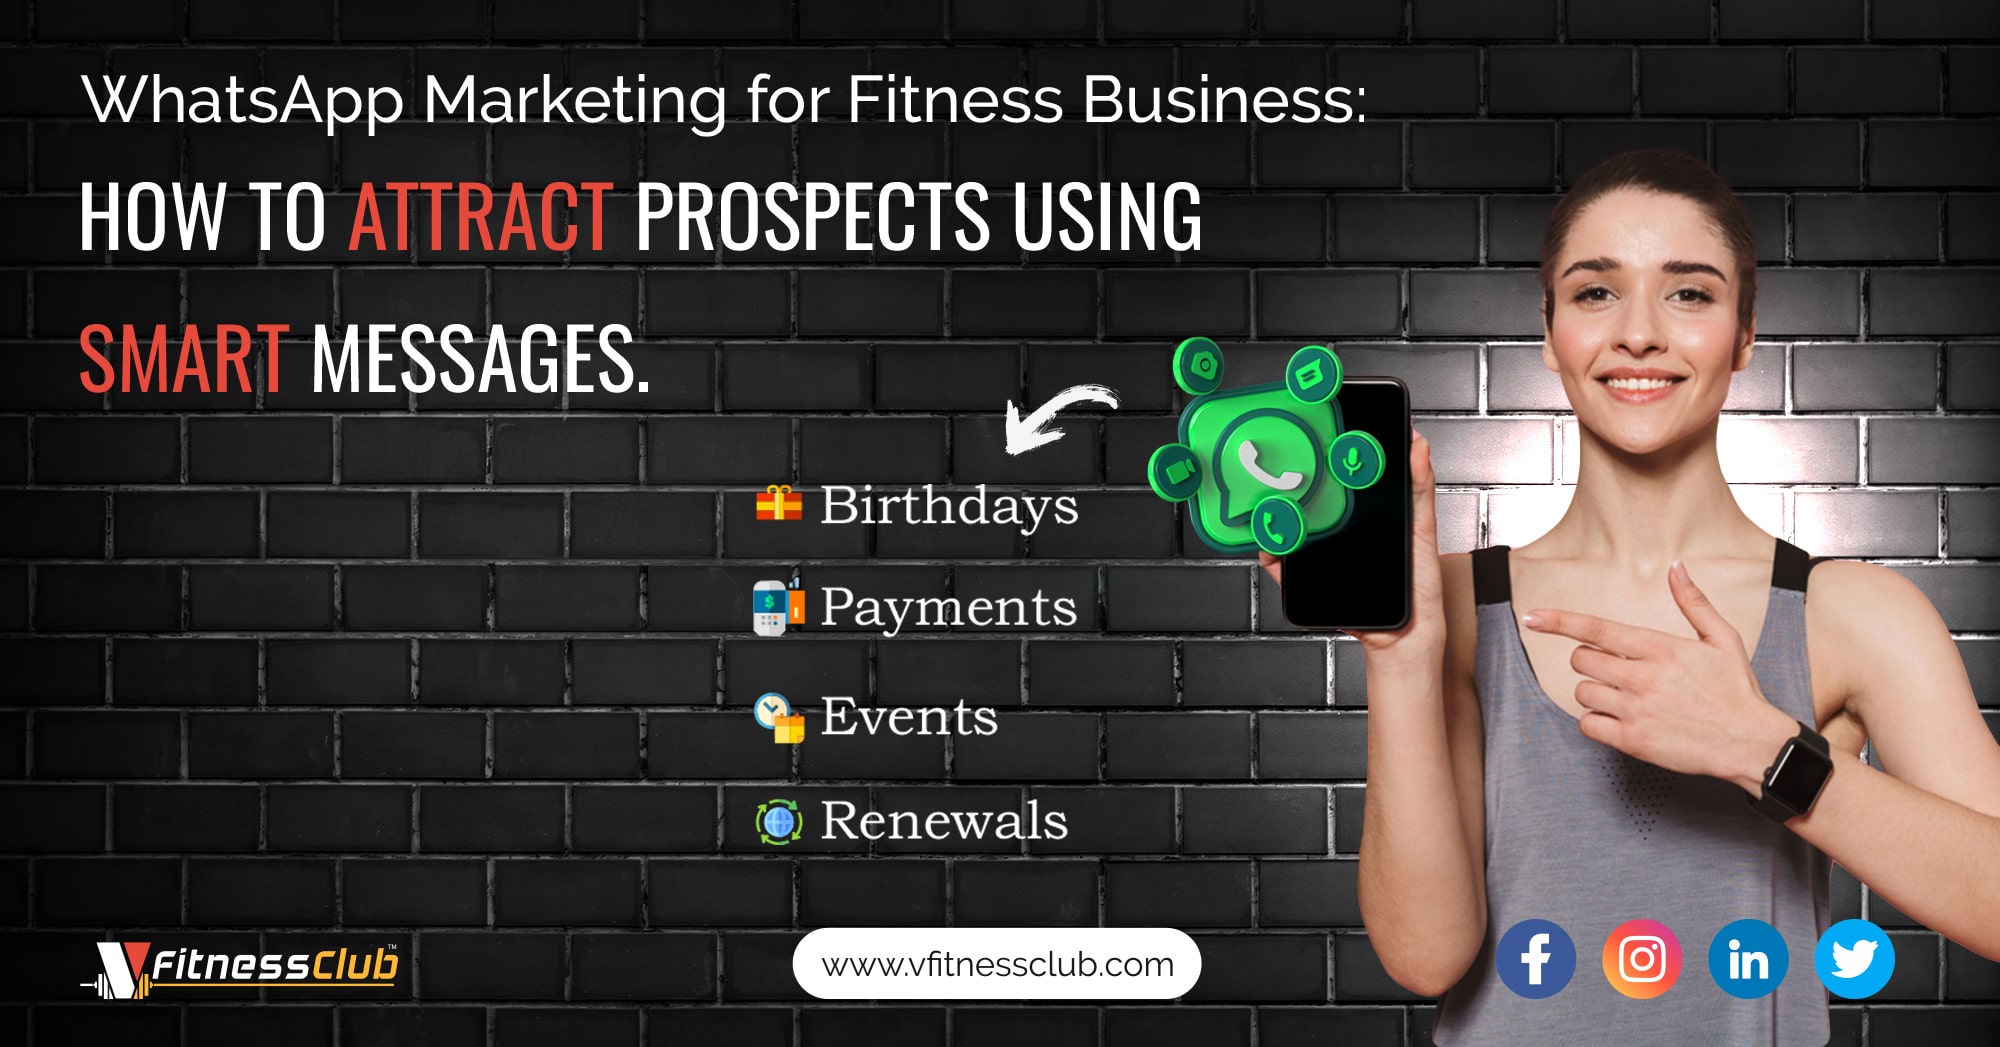 WhatsApp Marketing for Fitness Business: How to attract prospects using smart messages